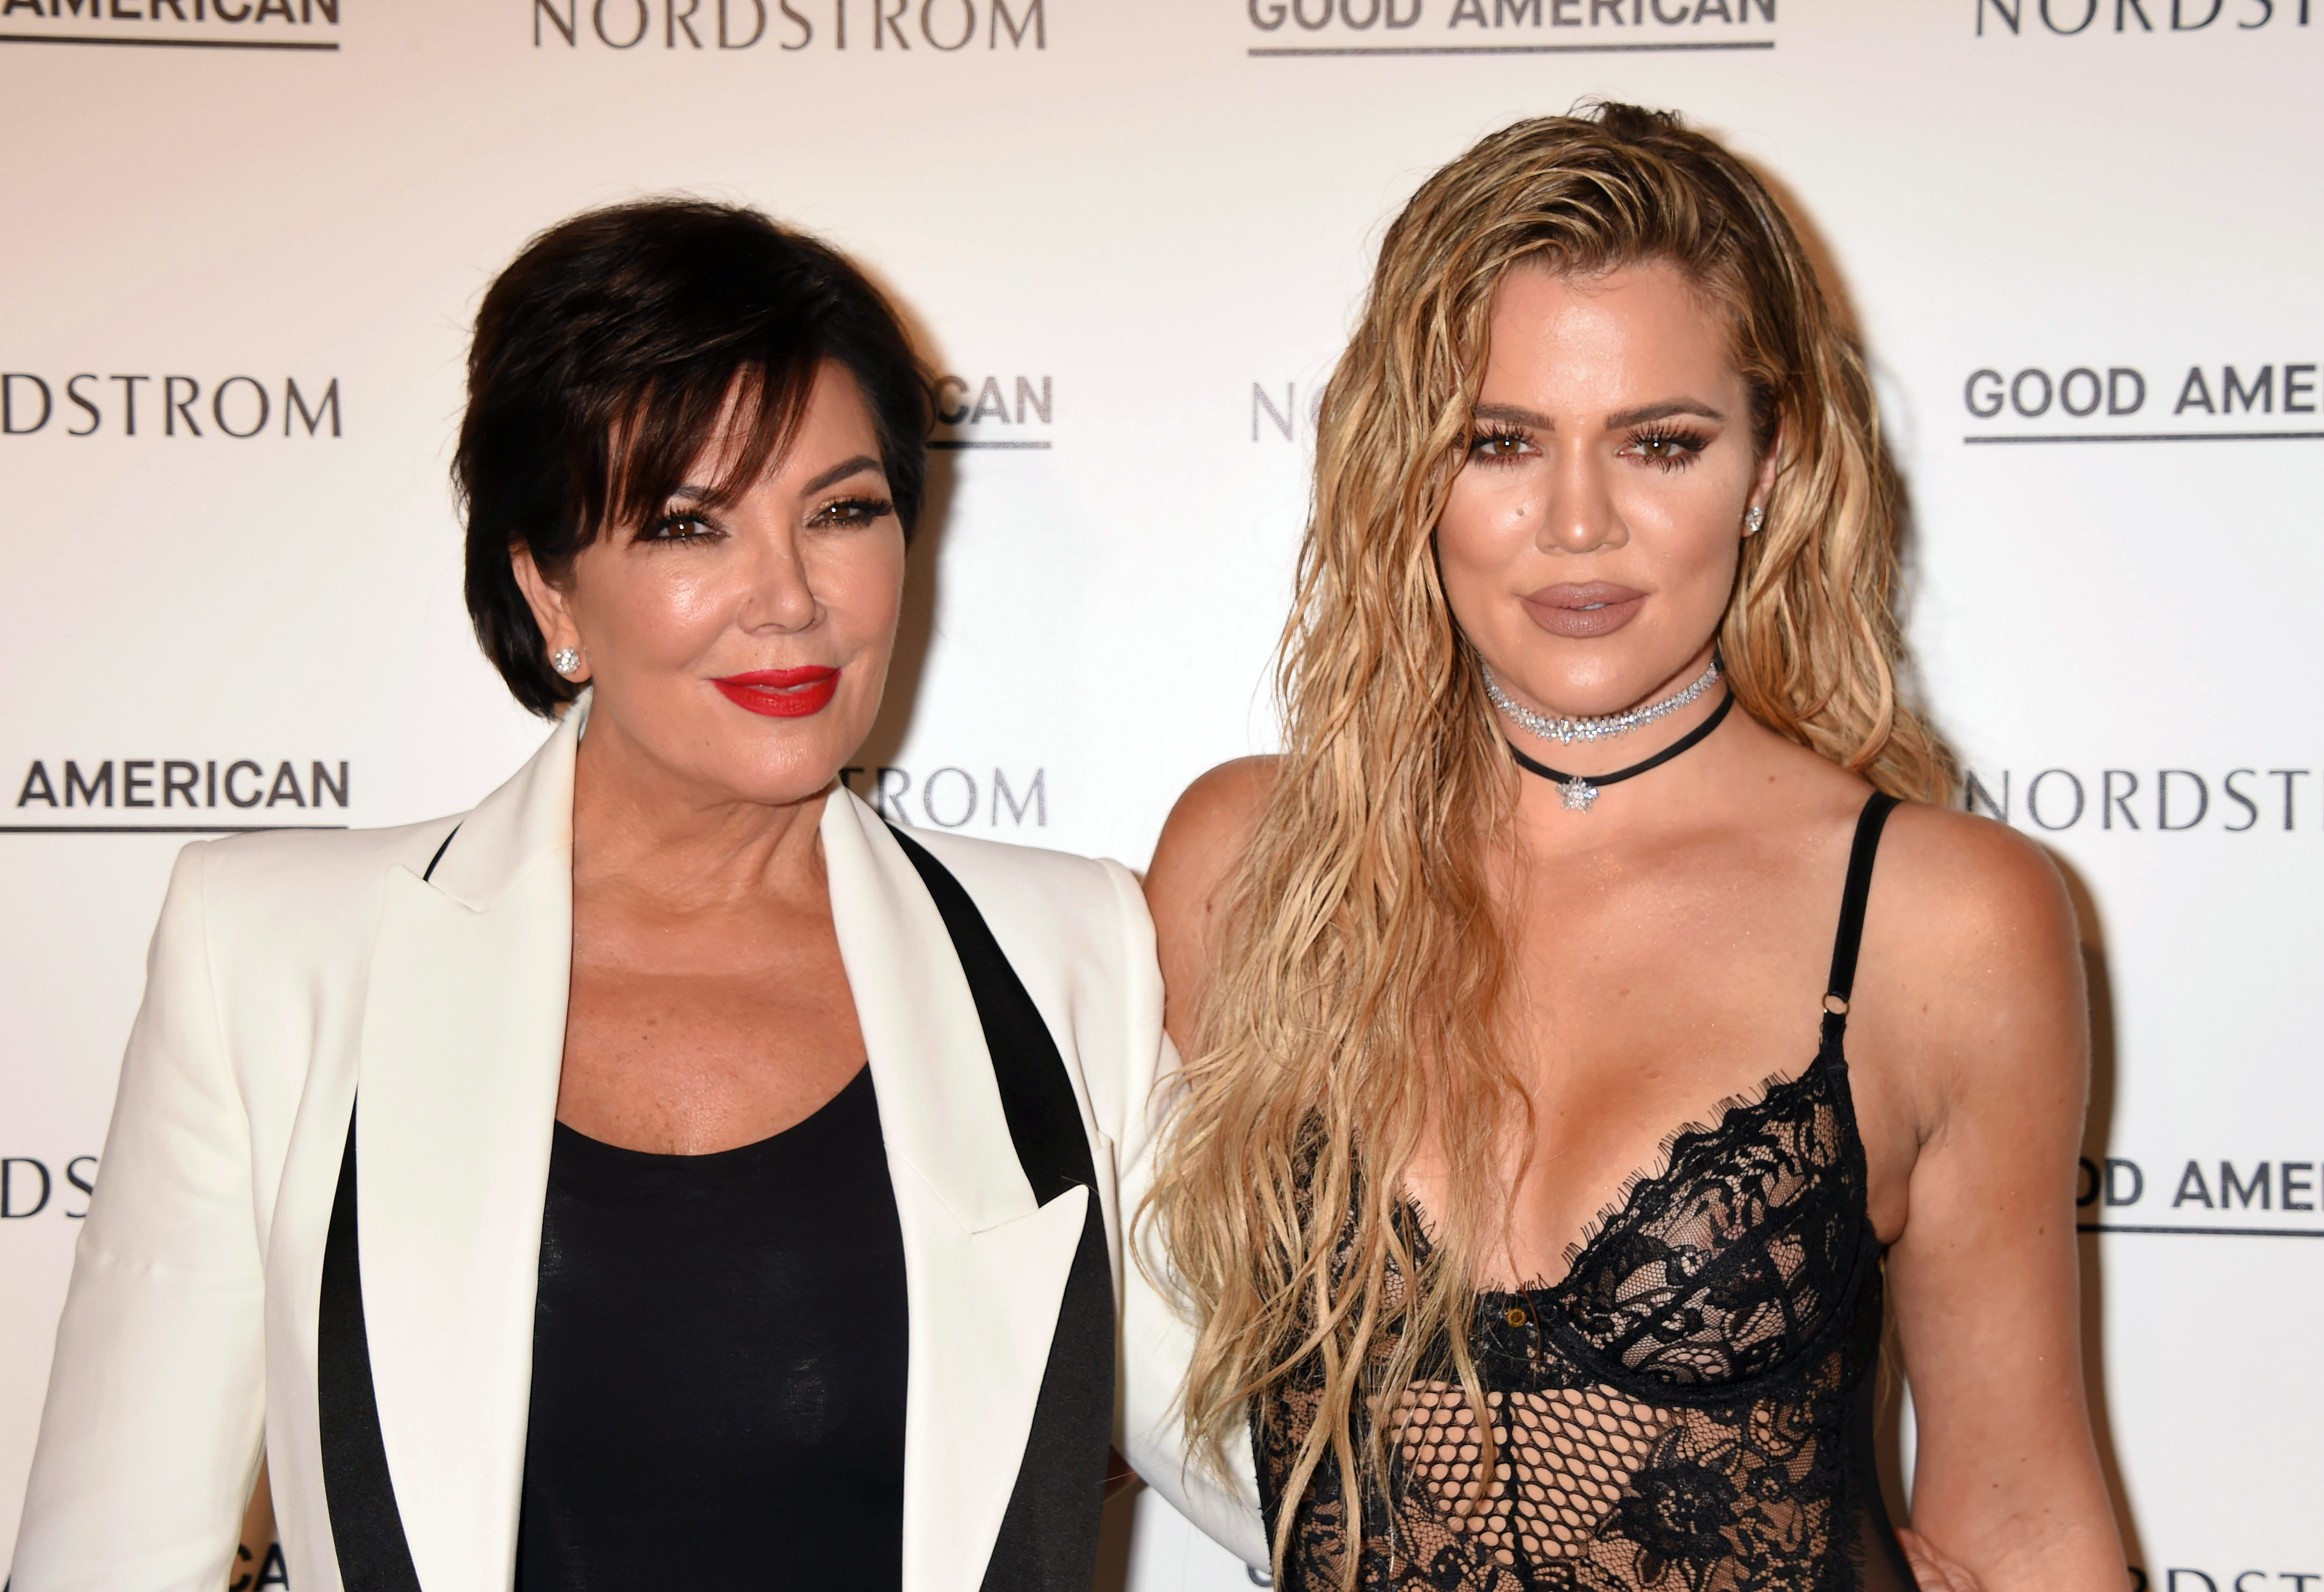 TV personality Kris Jenner (L) and Good American Founding Partner Khloe Kardashian attend the Good American Launch Event at Nordstrom at the Grove on October 18, 2016 in Los Angeles, California.